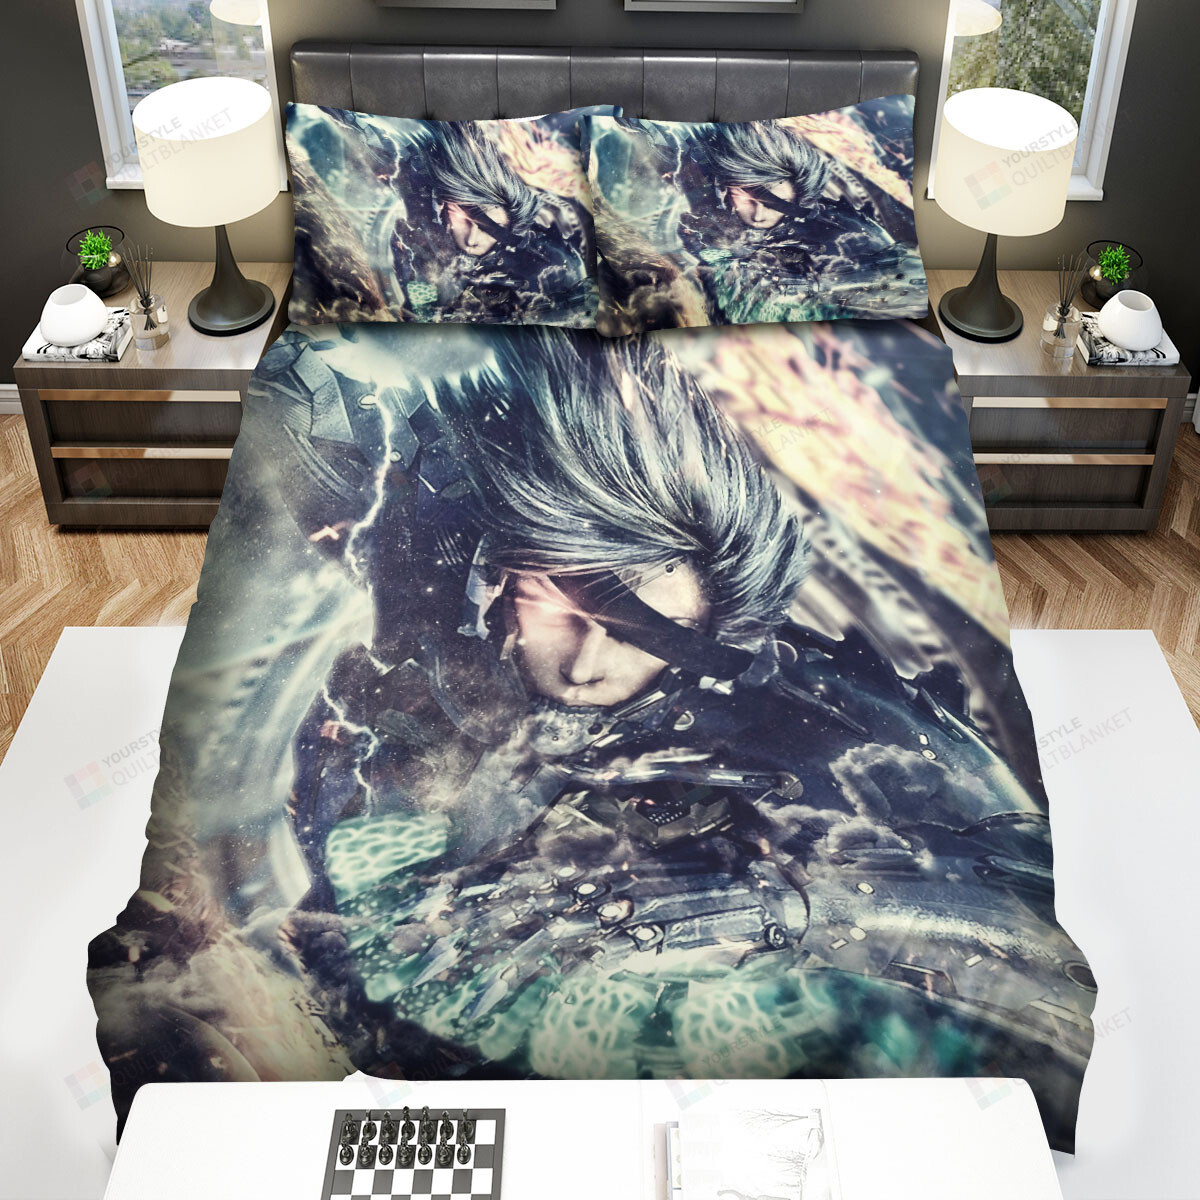 Metal Gear Solid Raiden Cutting Metal Bed Sheets Spread Duvet Cover Bedding Sets